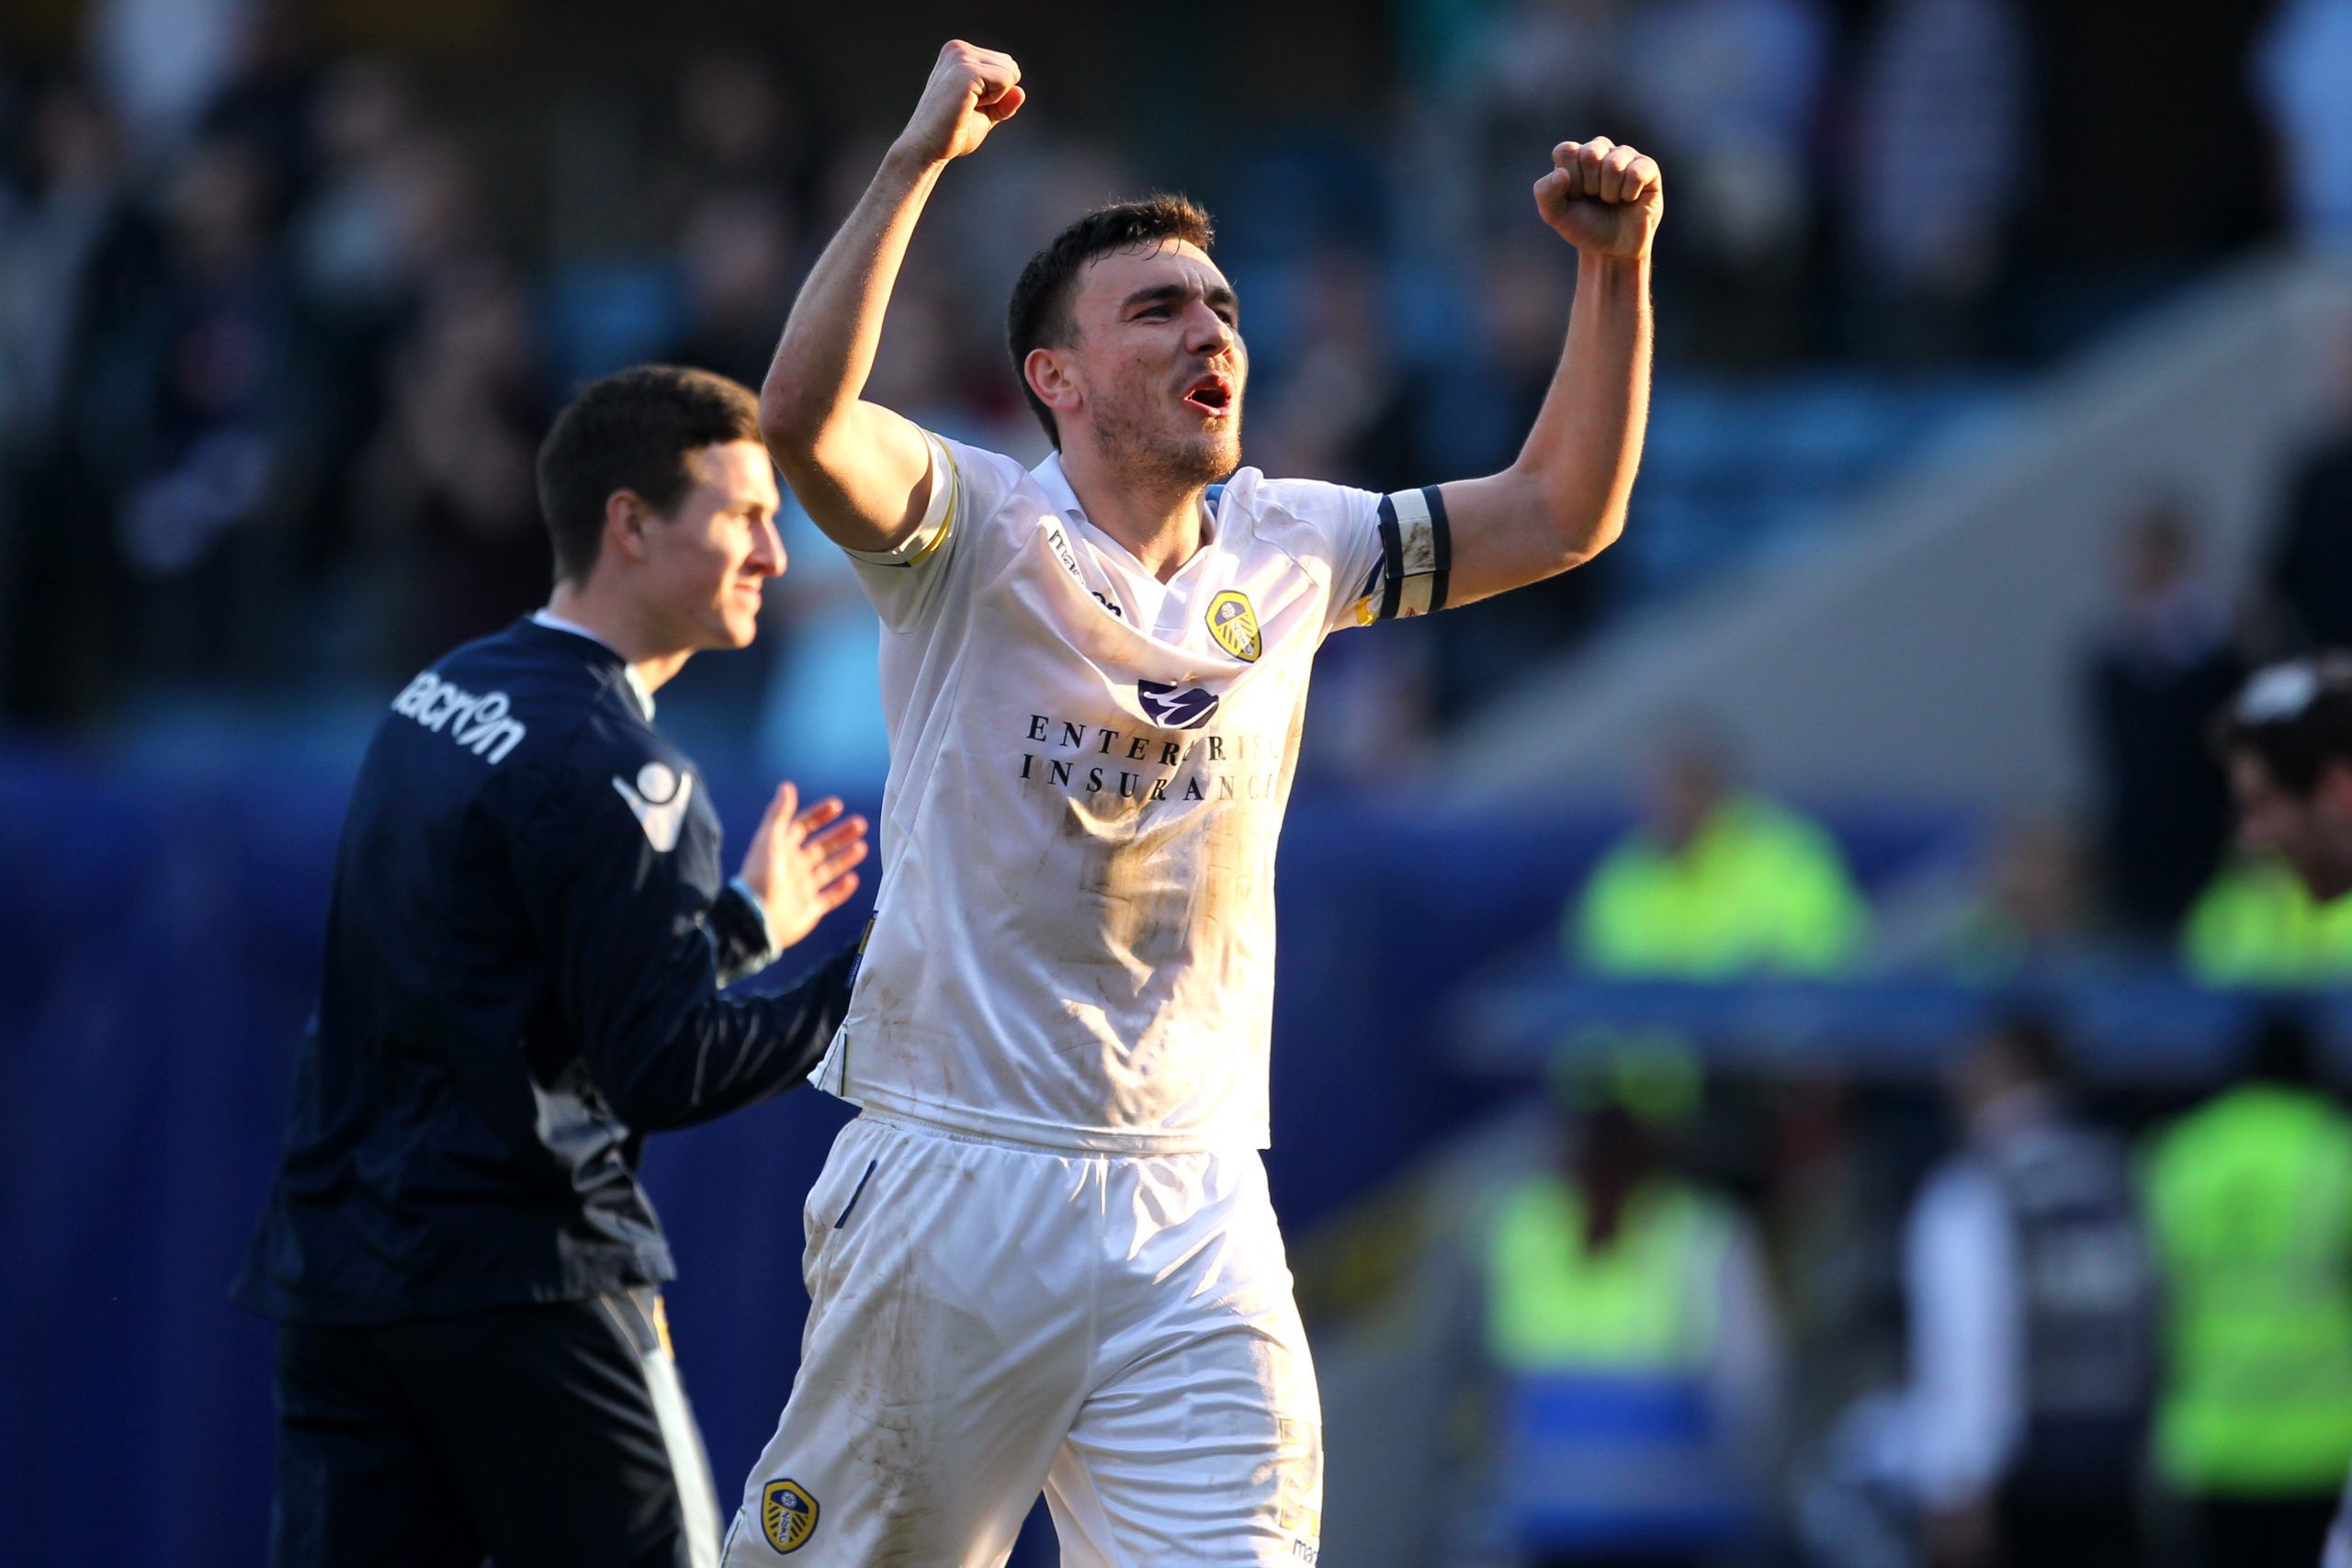 Football - Millwall v Leeds United npower Football League Championship - The New Den - 24/3/12 
Robert Snodgrass - Leeds United celebrates win at the end of the game 
Mandatory Credit: Action Images / Steven Paston 
EDITORIAL USE ONLY. No use with unauthorized audio, video, data, fixture lists, club/league logos or live services. Online in-match use limited to 45 images, no video emulation. No use in betting, games or single club/league/player publications.  Please contact your account represent